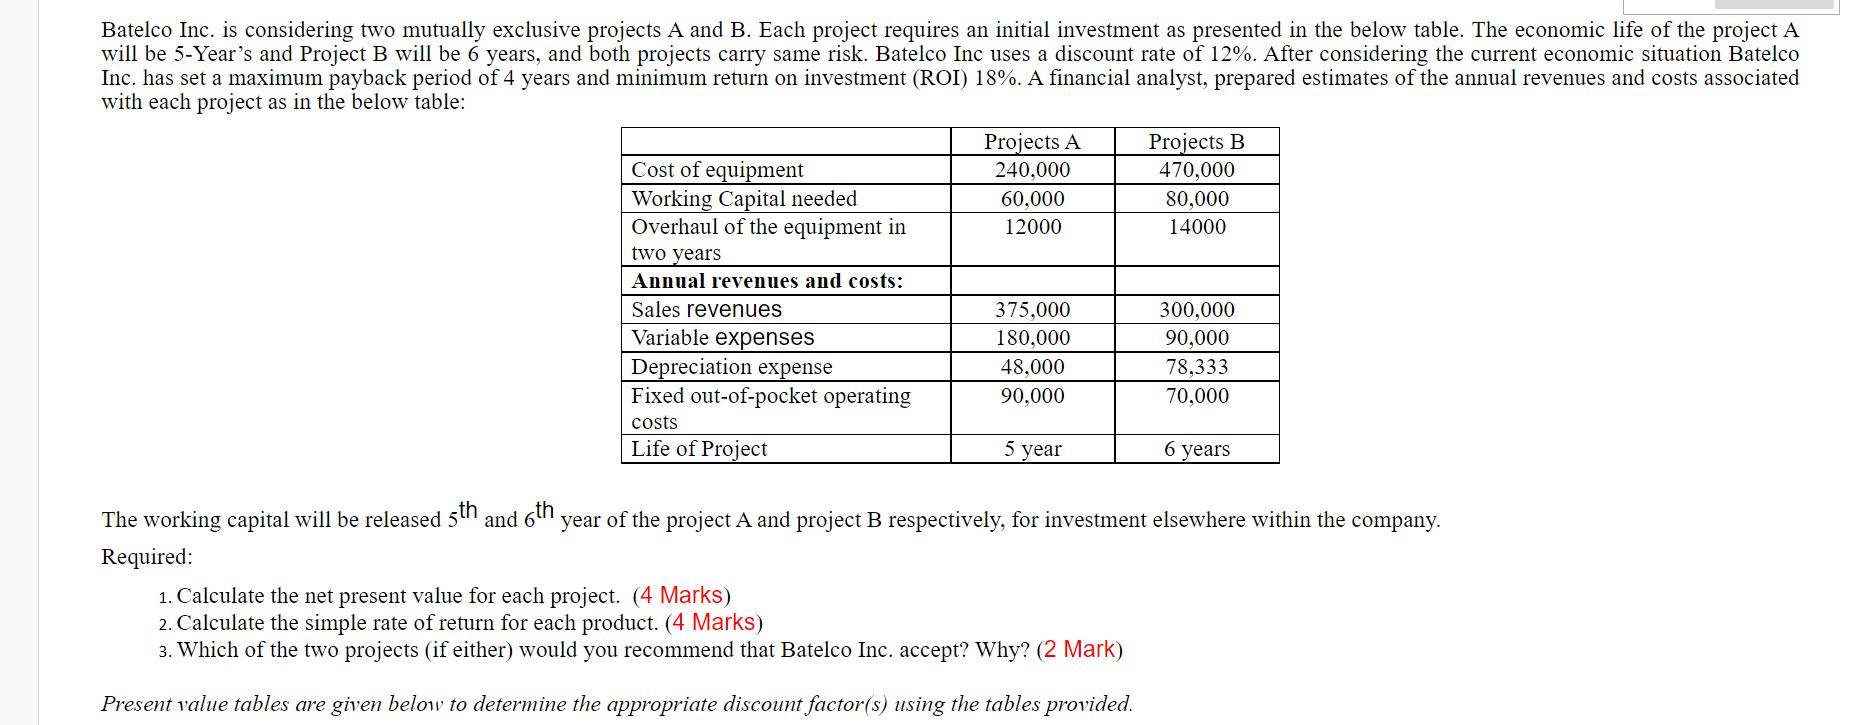 Batelco Inc. is considering two mutually exclusive projects A and B. Each project requires an initial